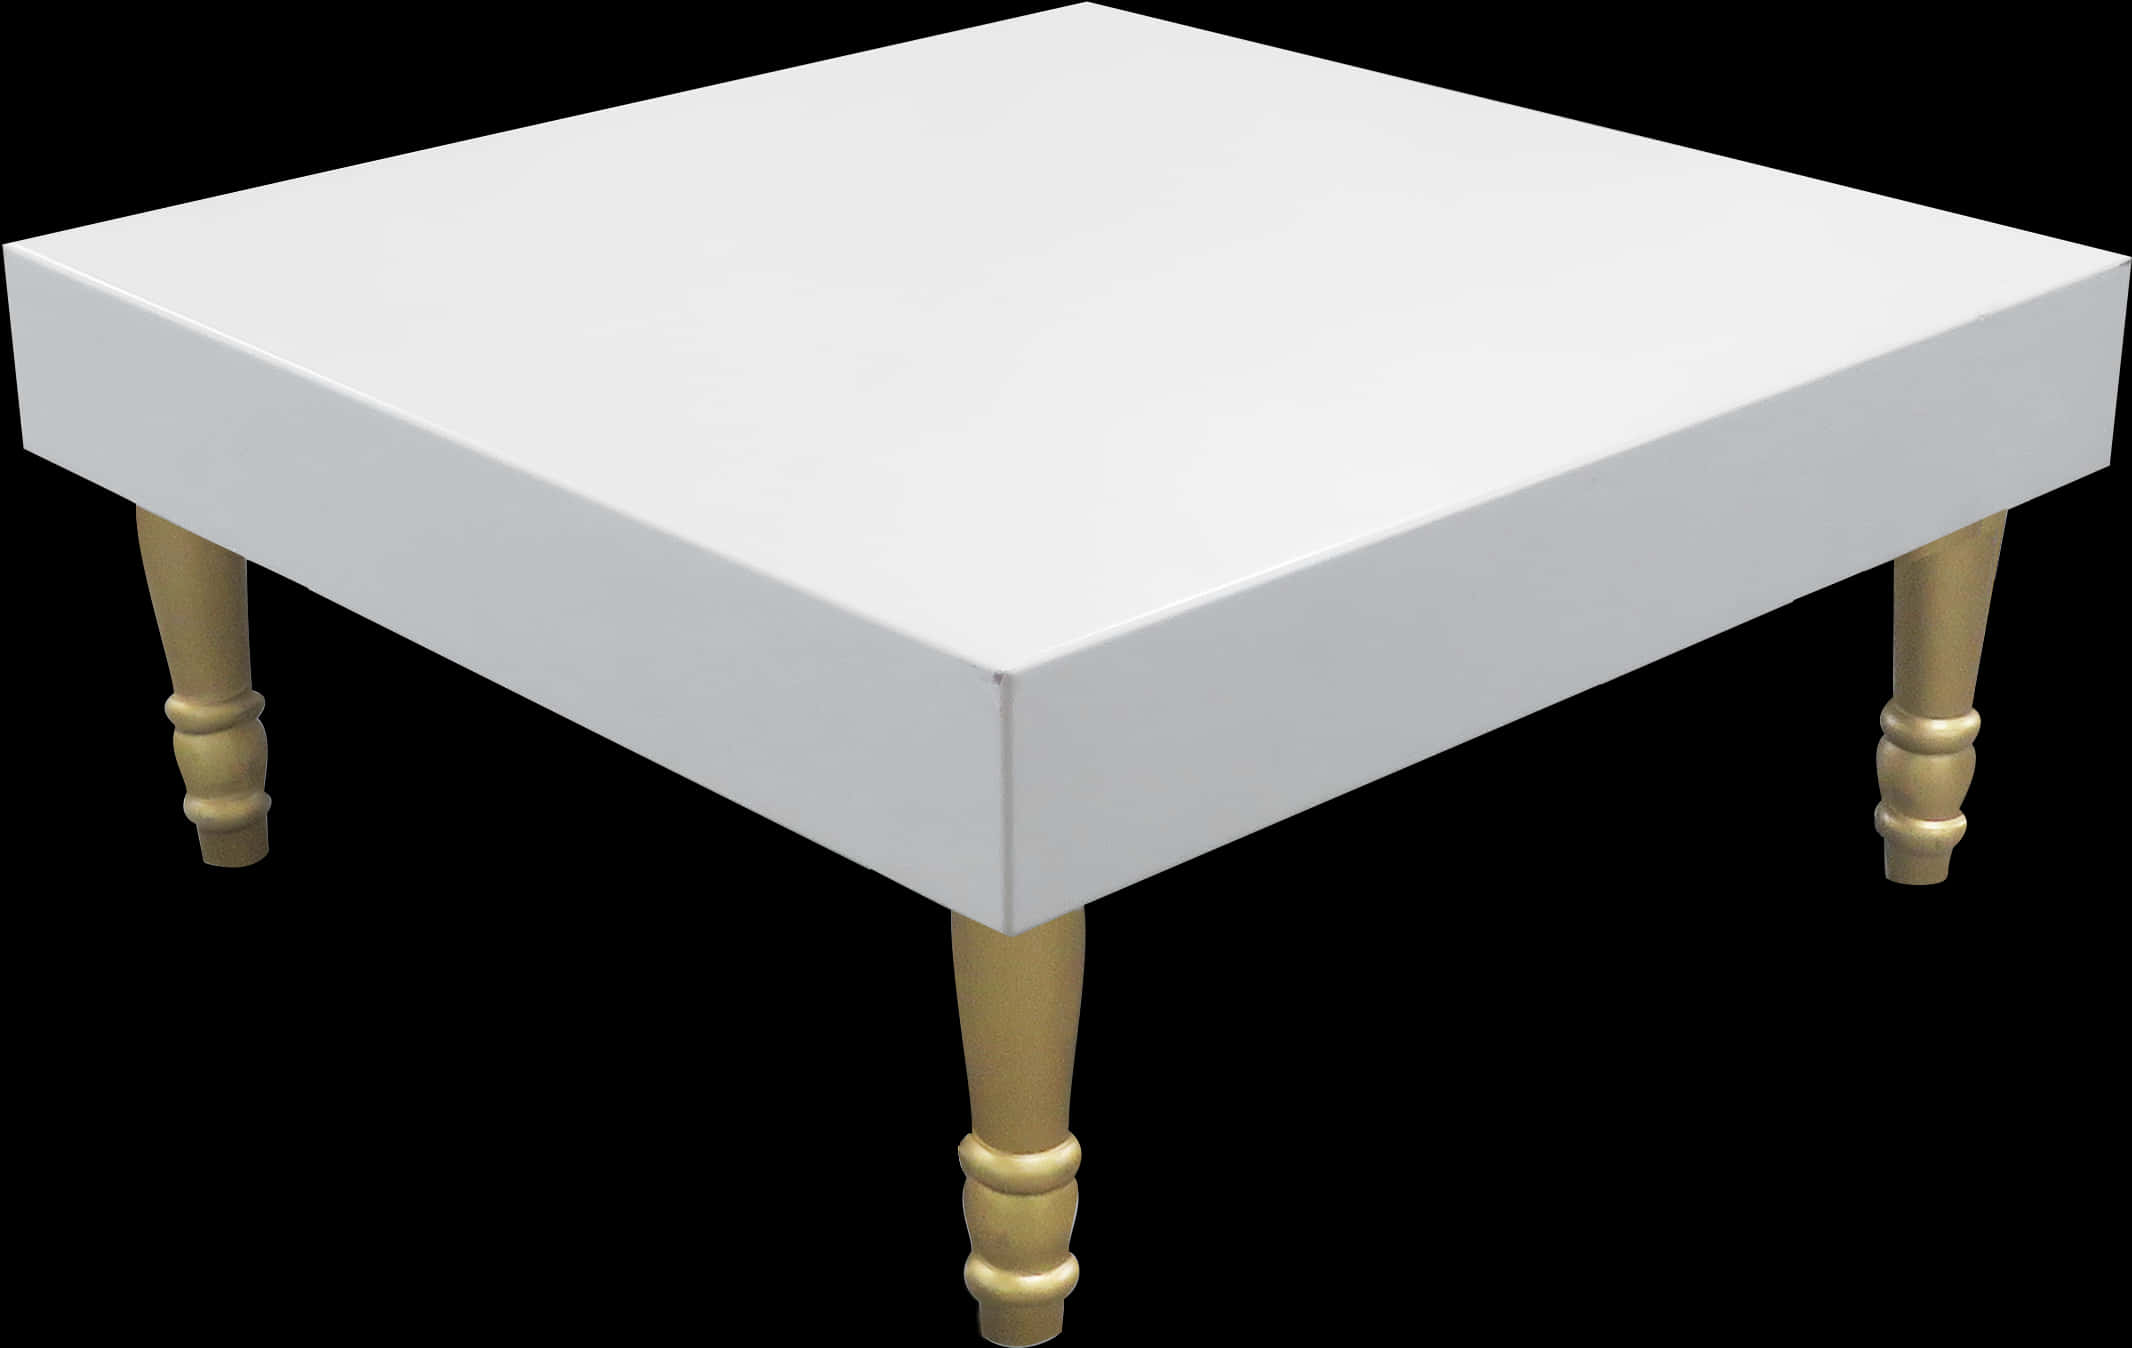 A White Square Table With Gold Legs